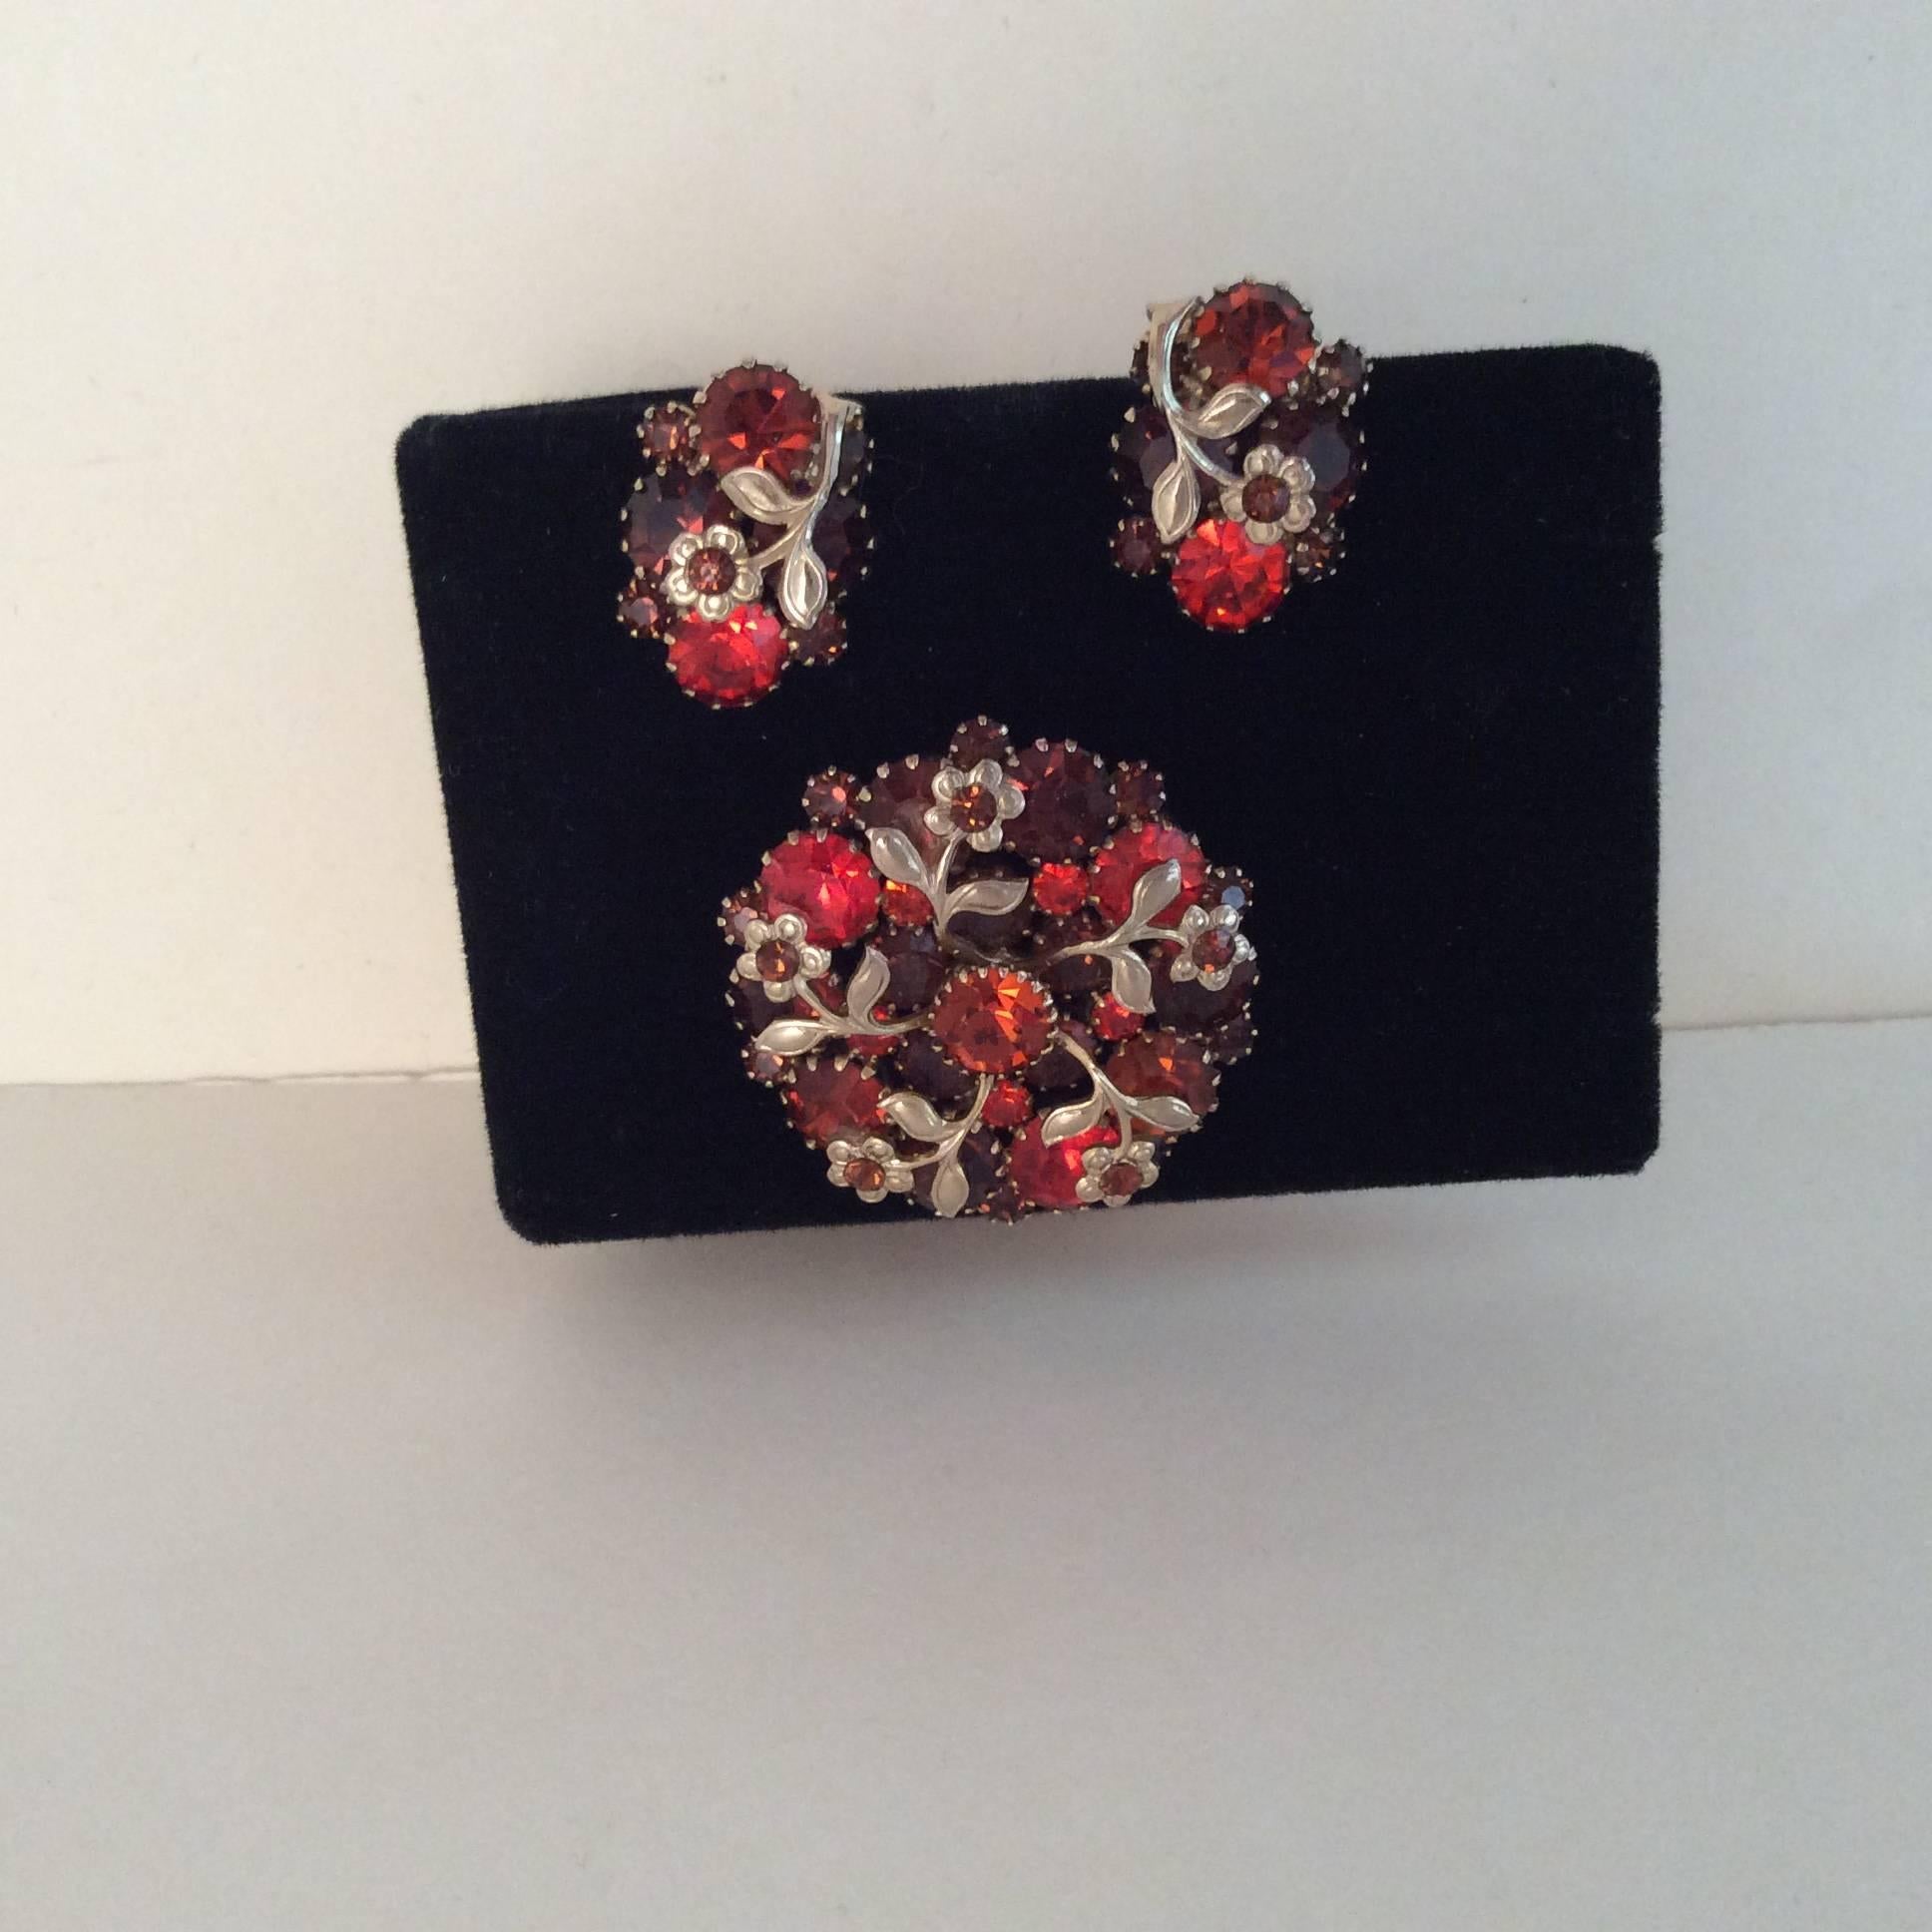 Weiss Rhinestone 3 Piece Brooch and Earring Set For Sale 4